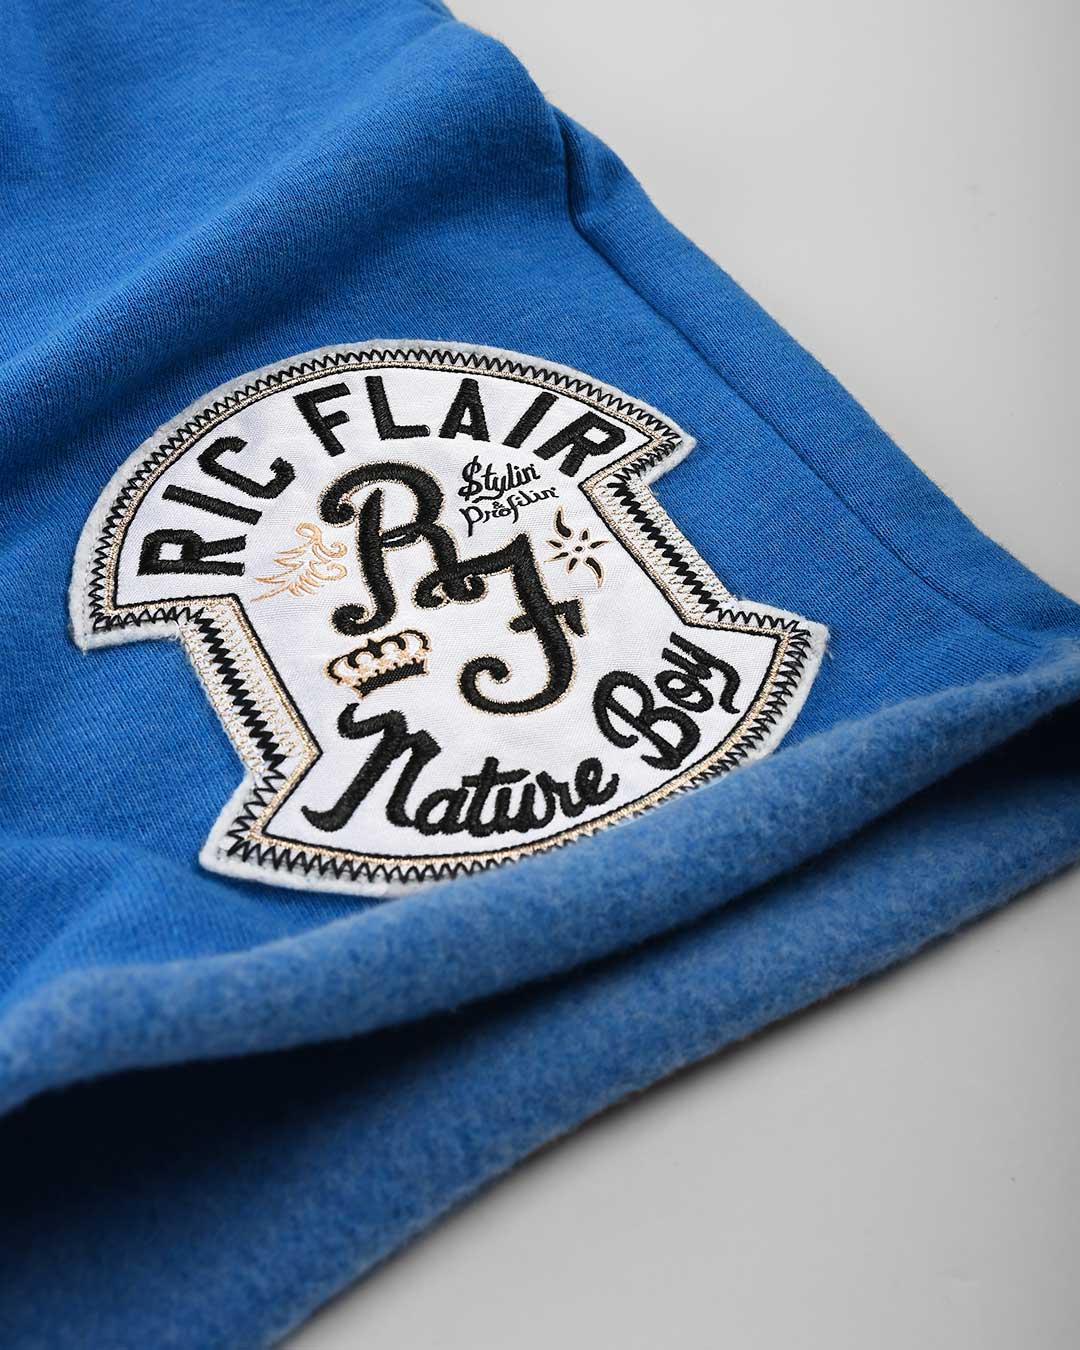 Ric Flair Nature Boy Blue Shorts - Roots of Fight